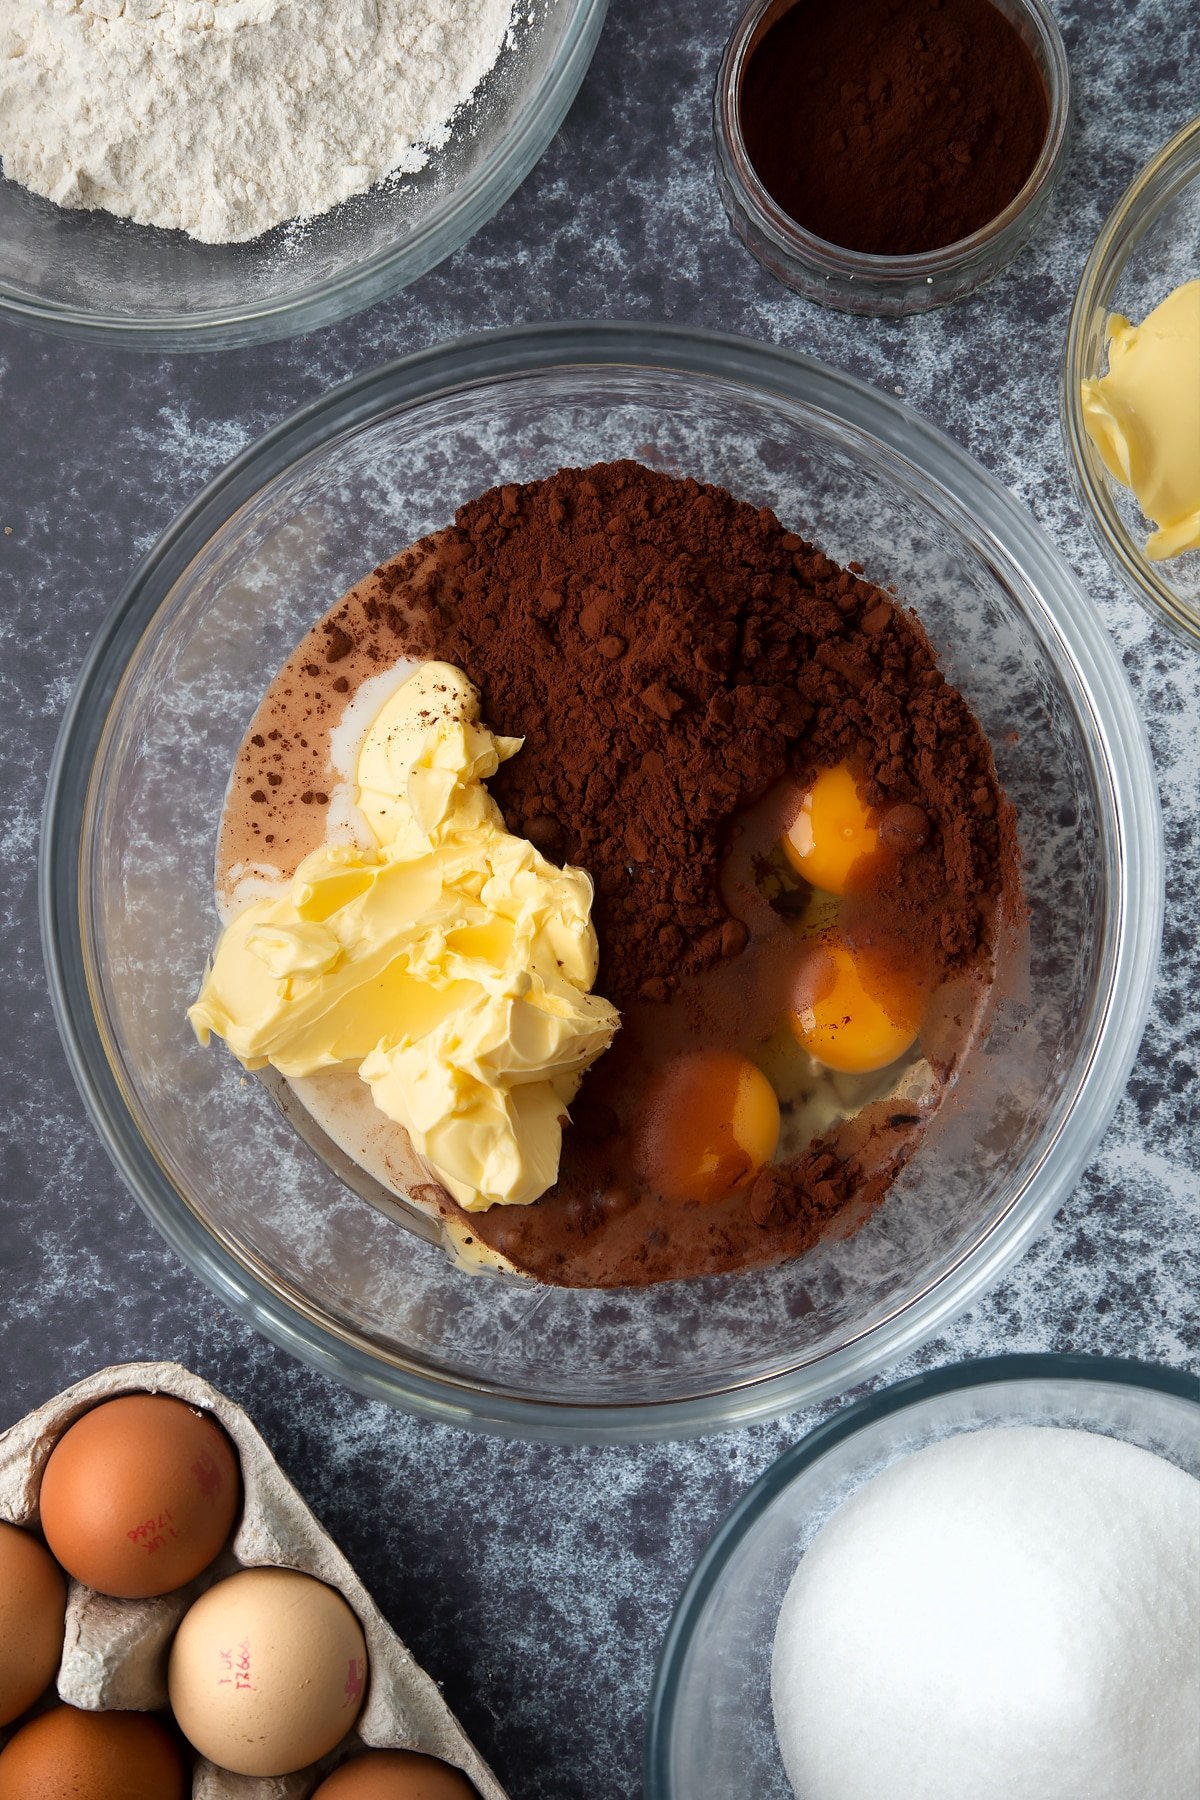 Margarine, oil, caster sugar, milk, cocoa and eggs in a large mixing bowl. Ingredients to make slime cupcakes surround the bowl.